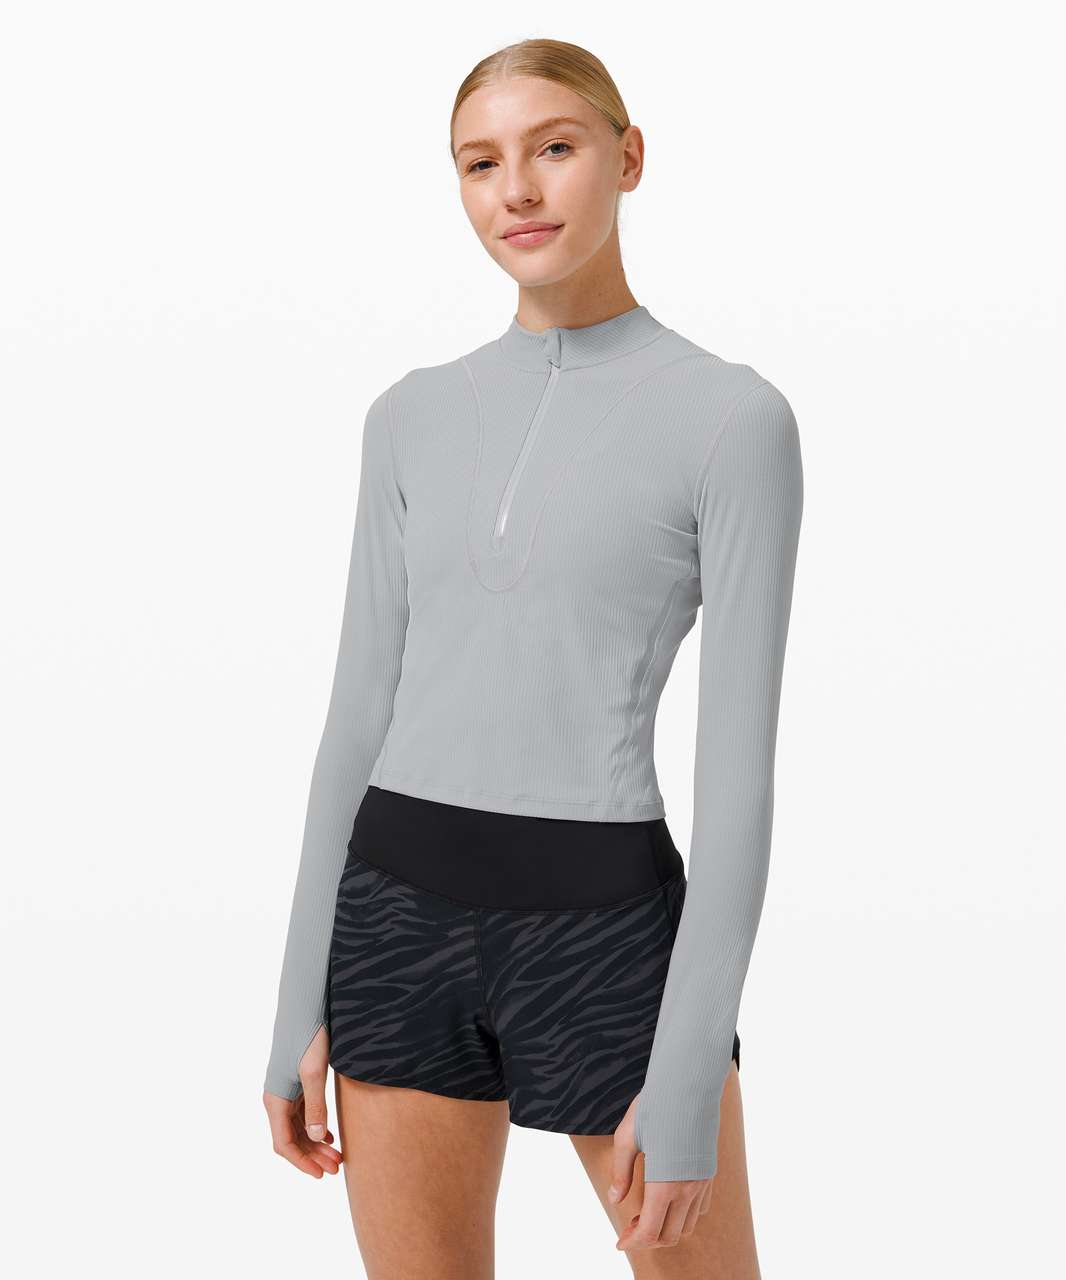 Lululemon NEW Gloss Trim Run Super High-Rise Tight Rhino Grey Size 12 -  $124 New With Tags - From Hope